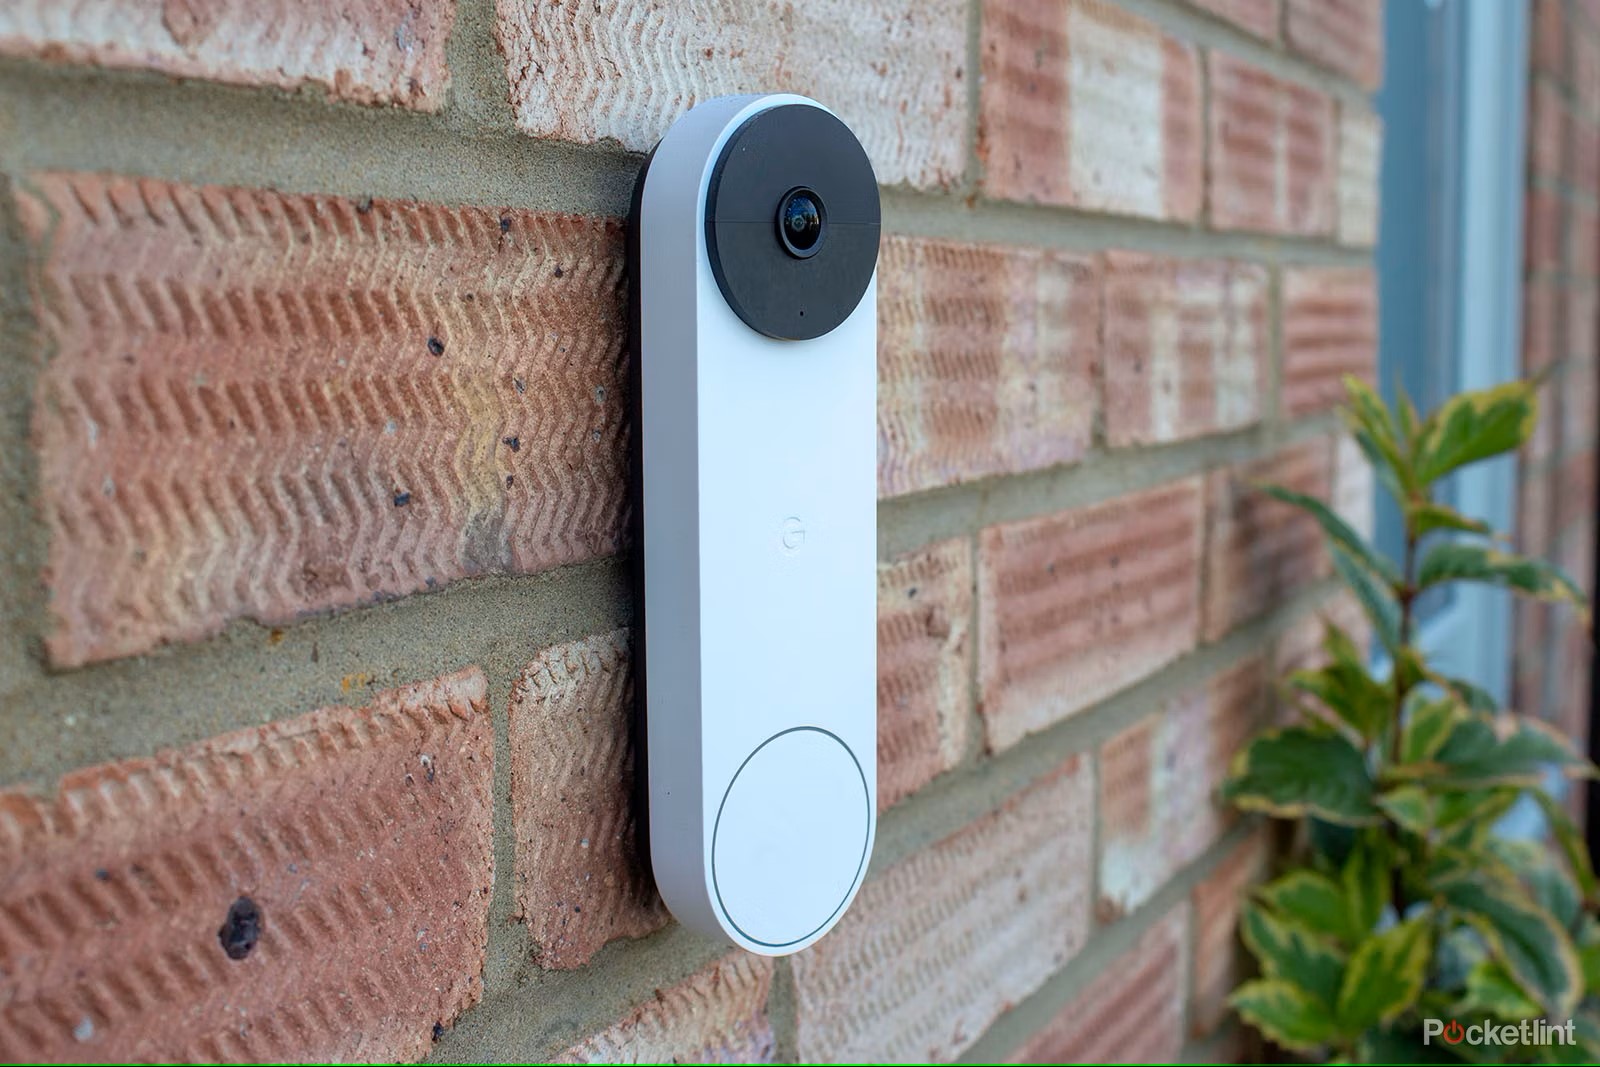 How To Charge Google Doorbell